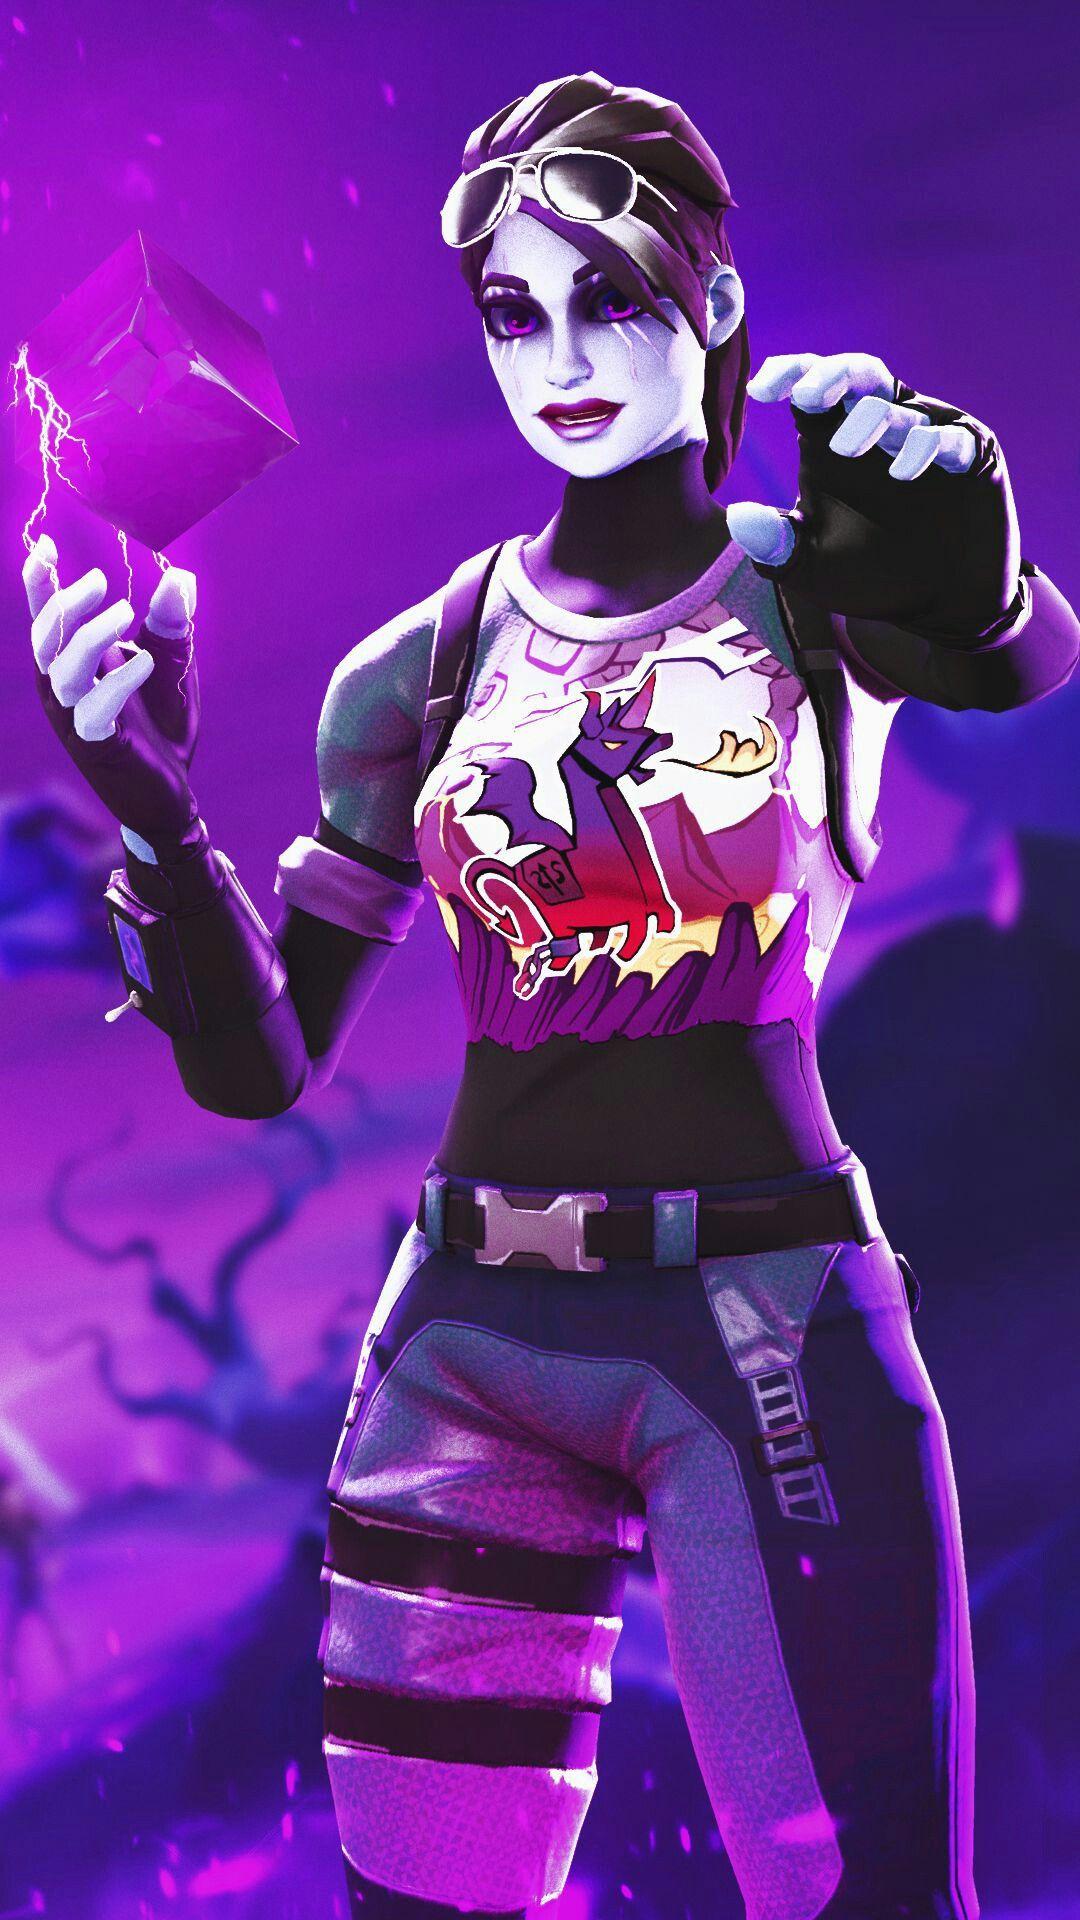 Best Controller Player. Game wallpaper iphone, Best gaming